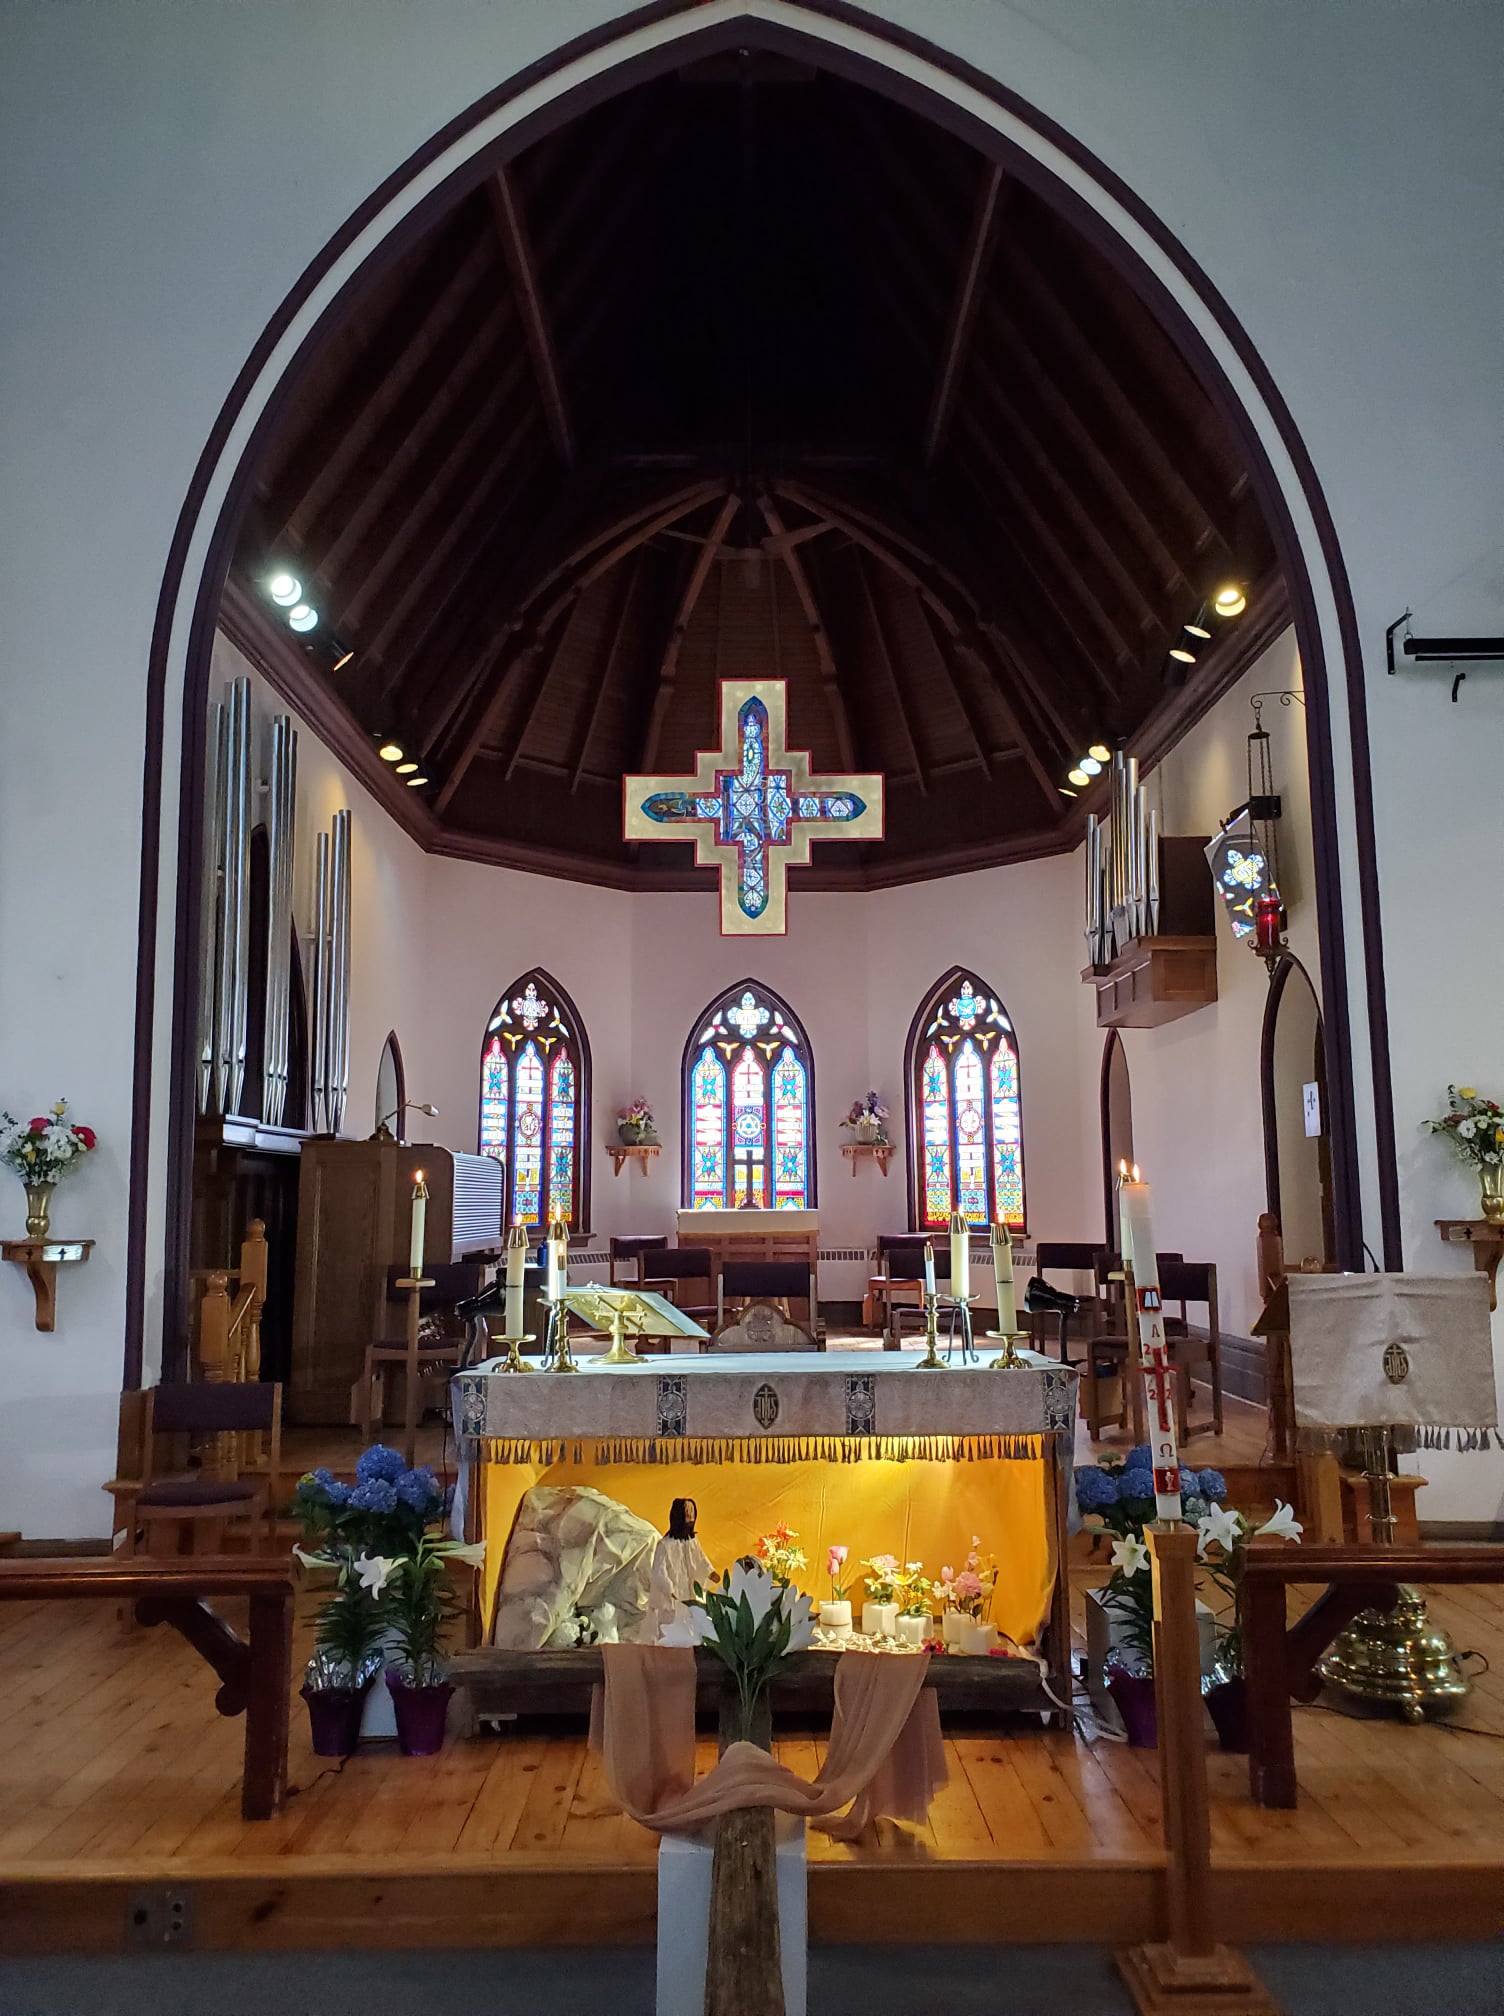 Interior of St. Paul's Anglican Church